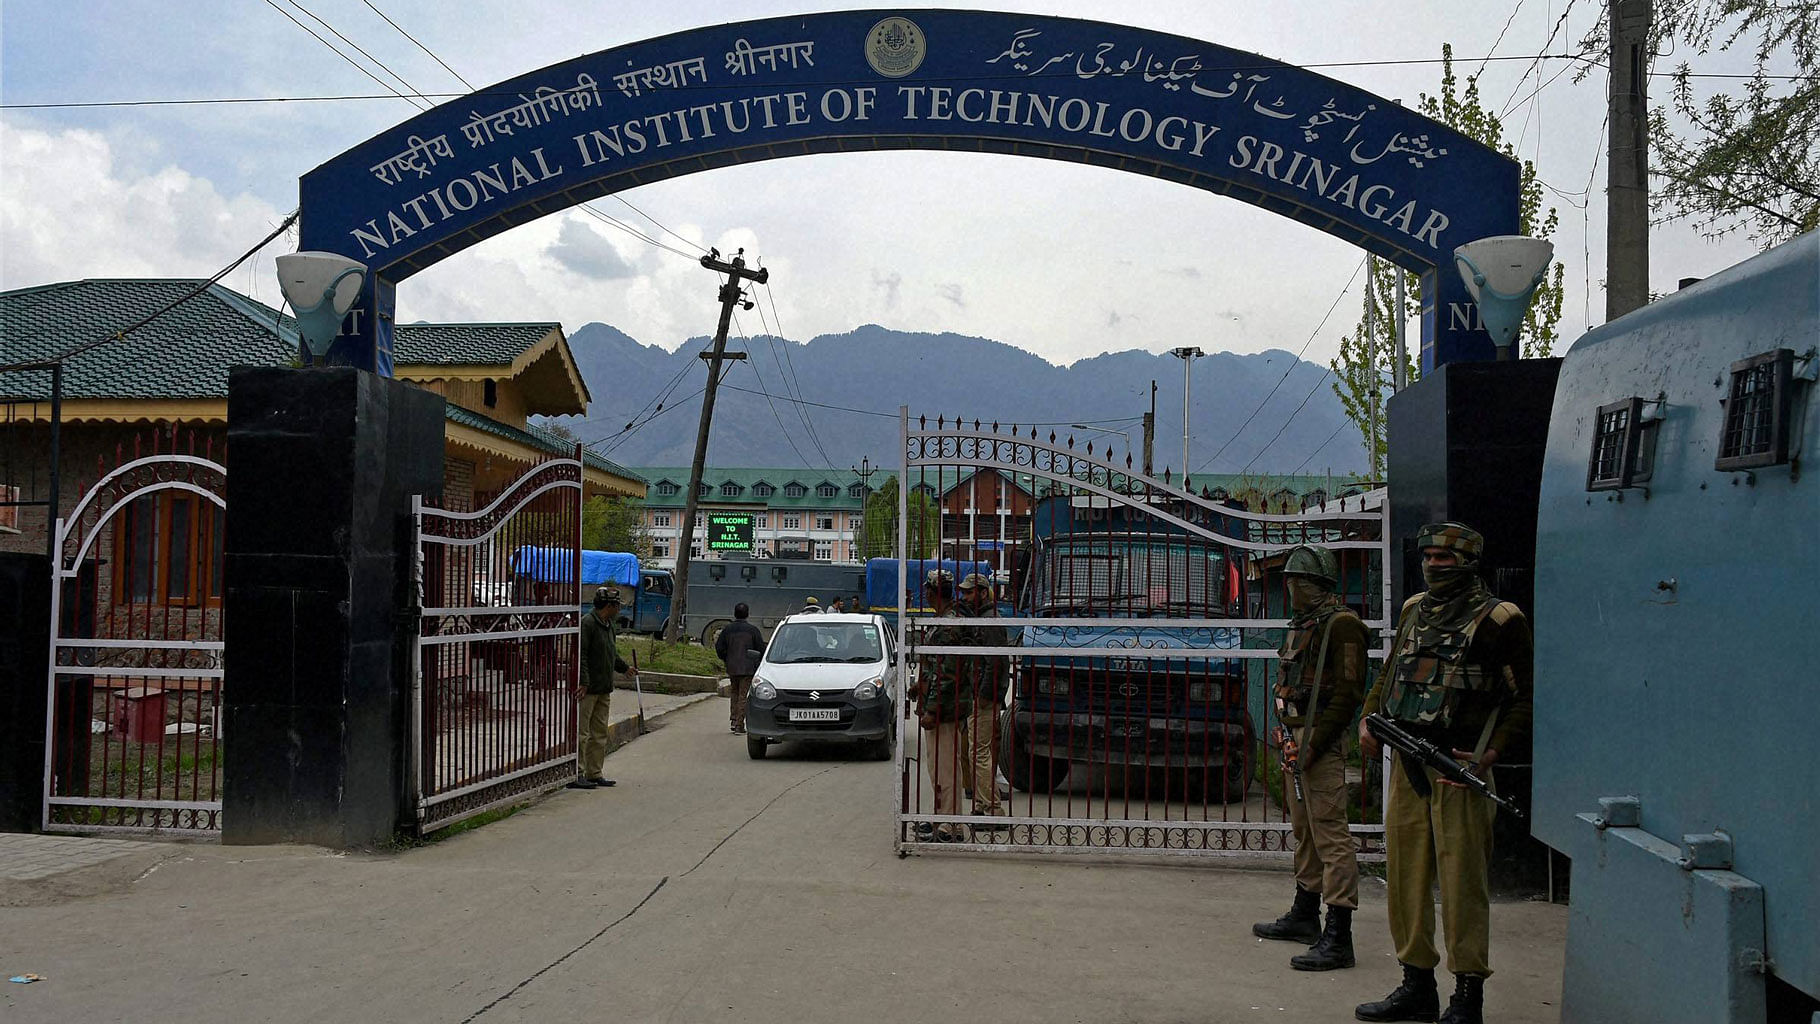 Police and CRPF deployed at National Institute of Technology (NIT) following tension between local and non-local students in Srinagar on Friday. (Photo: PTI)